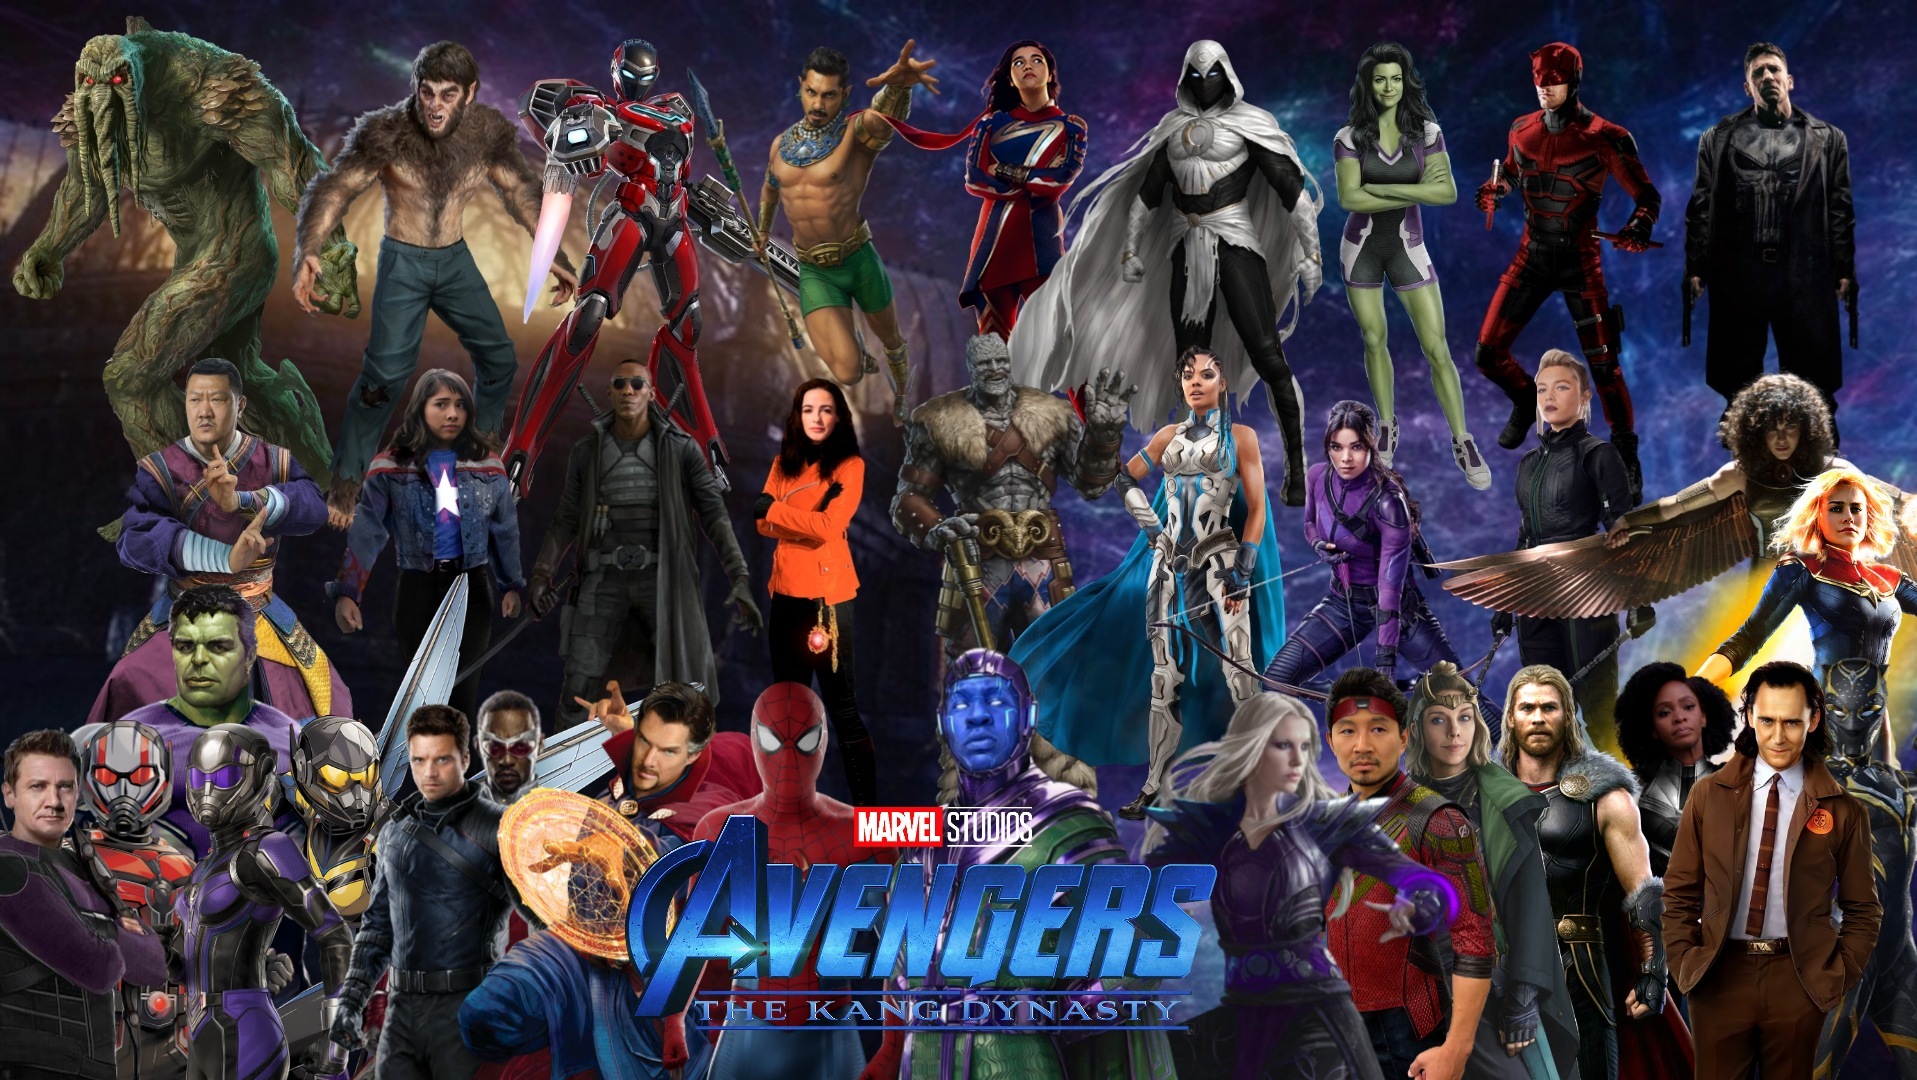 avengers the kang dynasty poster fun made by me by magbmkgcf on DeviantArt